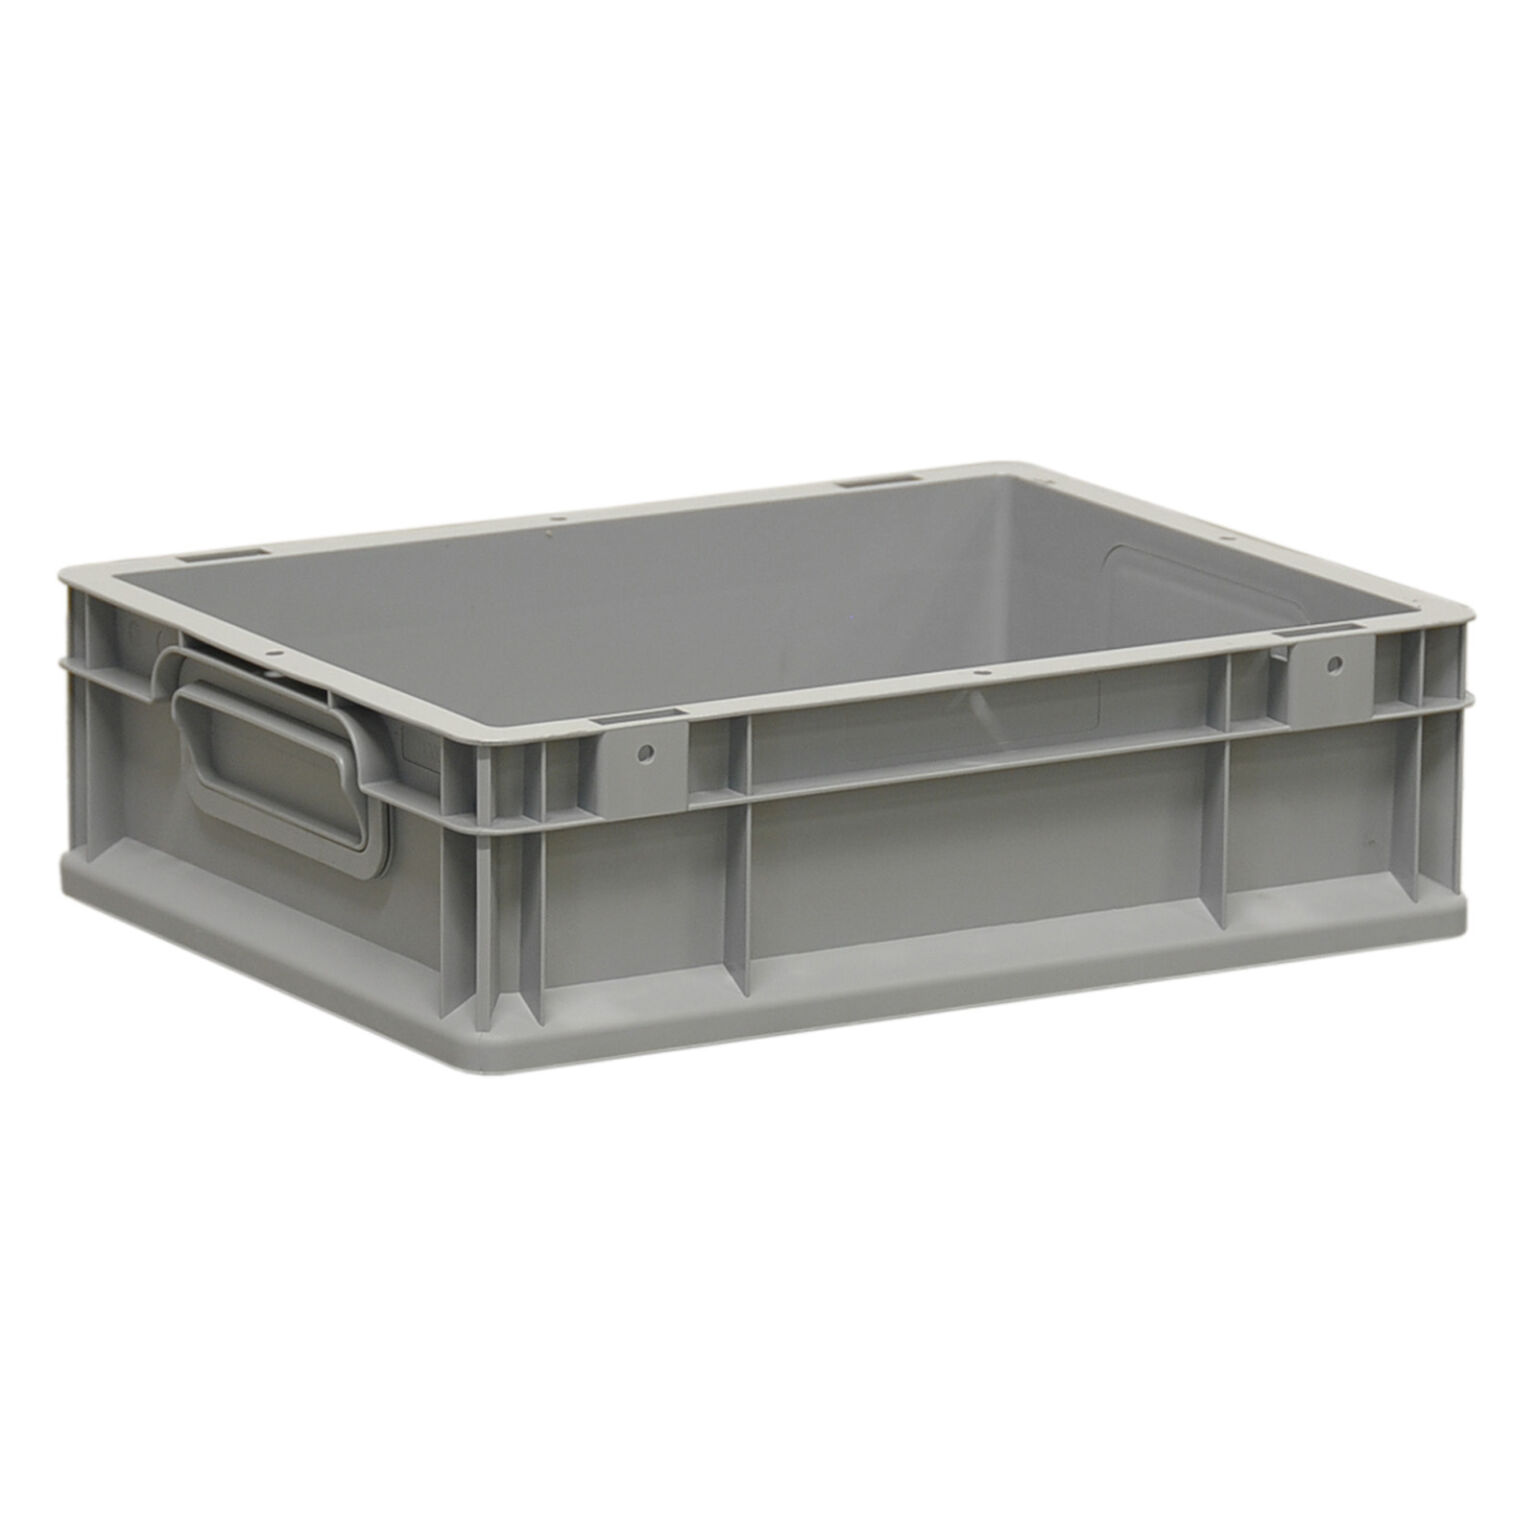 Stacking box plastic stackable all walls closed Type: stackable 